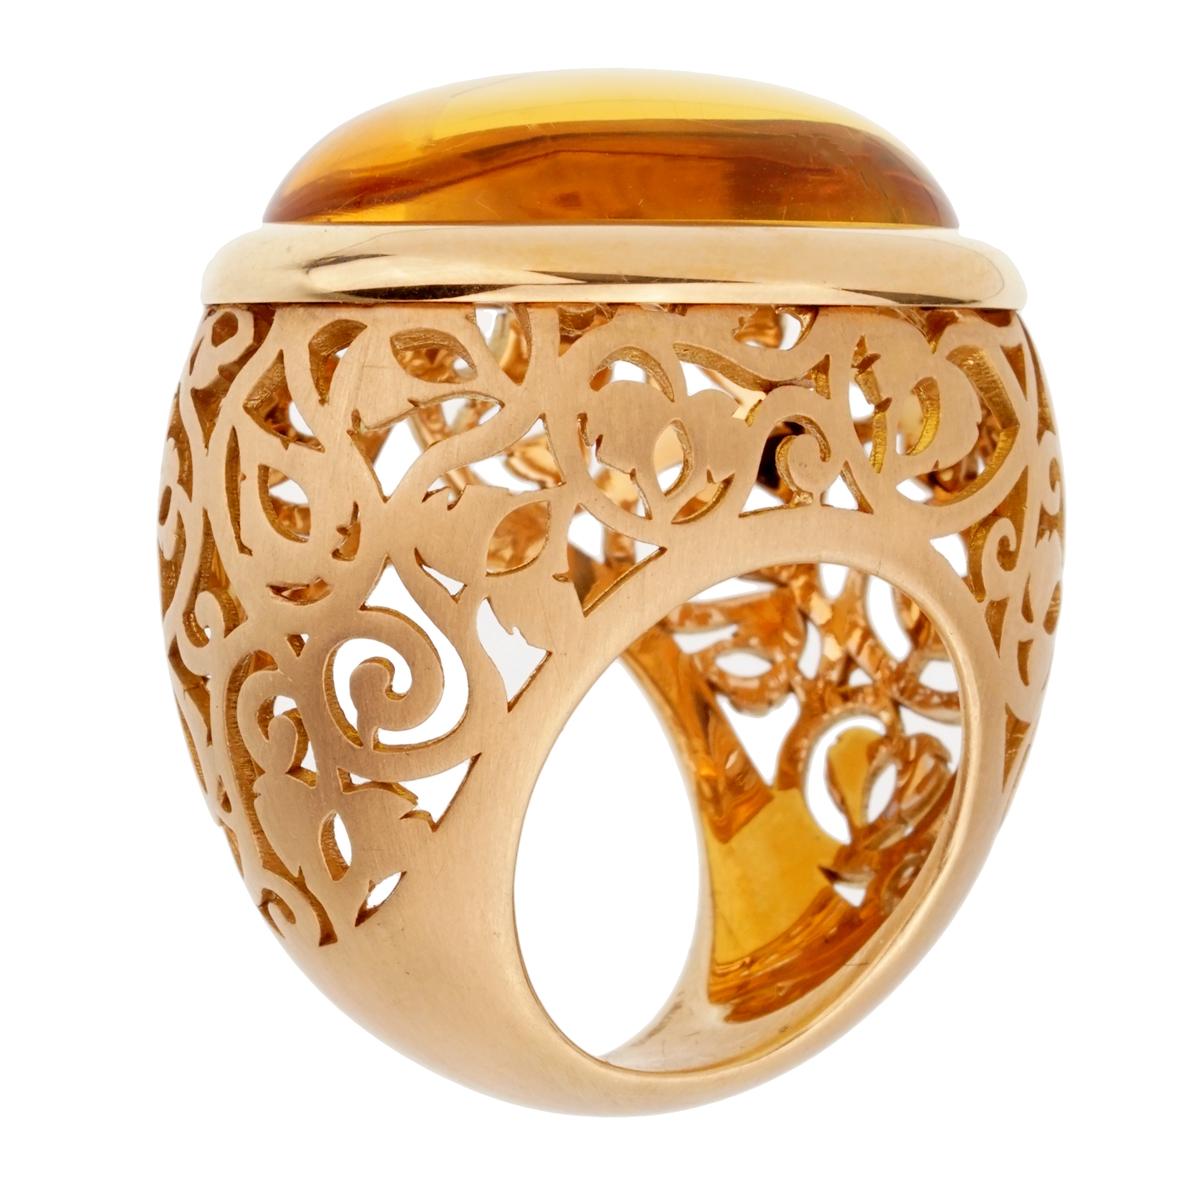 A magnificent brand new Pomellato rose gold cocktail ring showcasing a 19.94ct cabochon Amber. The ring measures a size 5.75 and can be resized.

Pomellato Retail Price: $7,800
Sku: 2322